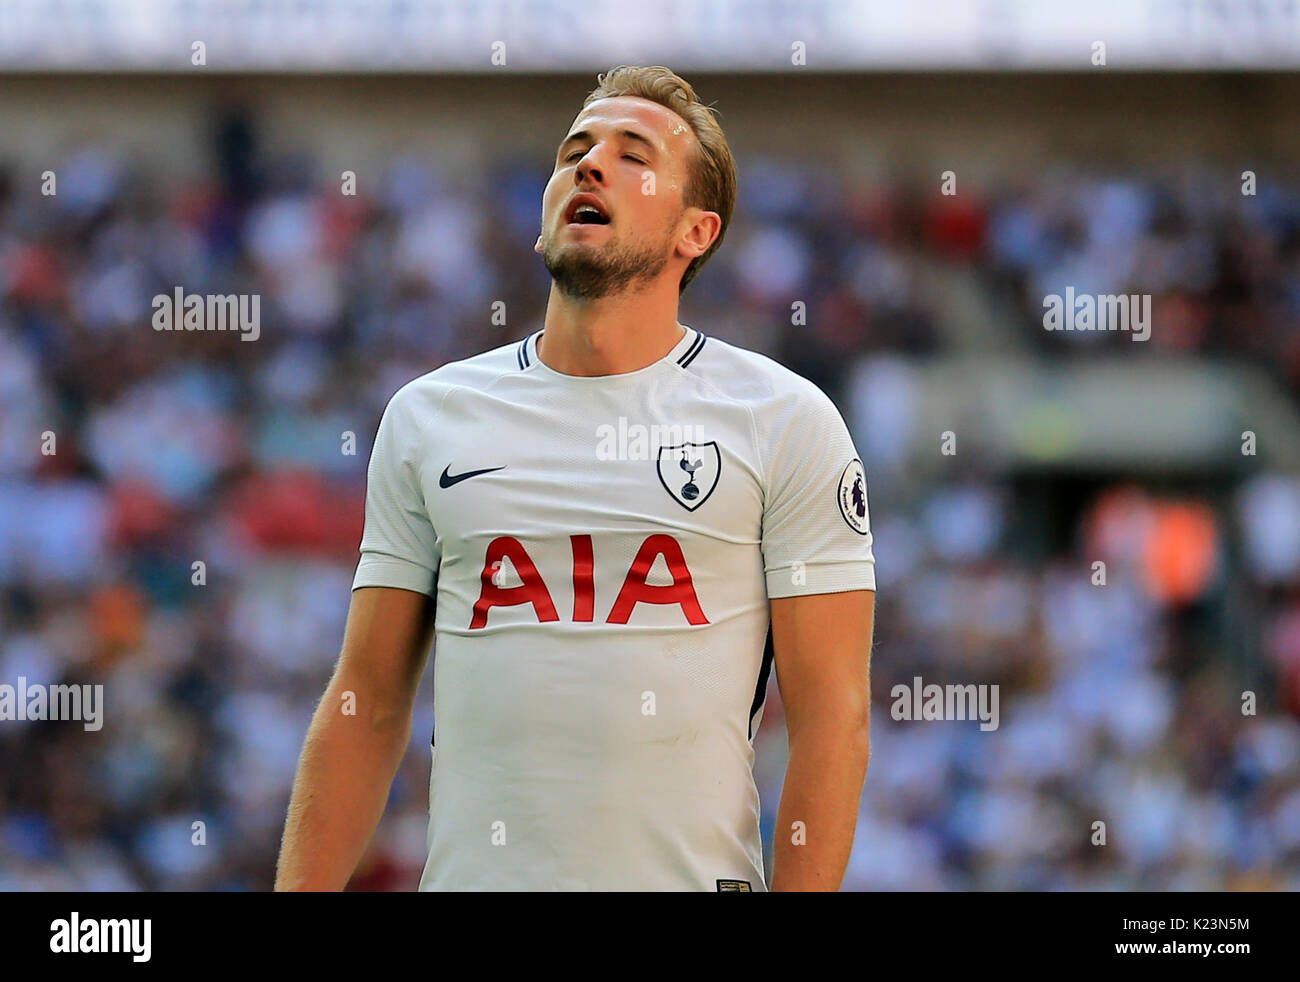 (170827) LONDON, ENGLAND -- Fussball, Premier League: Tottenham Hotspur vs Burnley im Wembley Stadion am 27.08.2017 in London, England. Harry Kane of Tottenham Hotspur disappointed with his missed goal opportunity during the Premier League match between Tottenham Hotspur and Burnley at Wembley Stadium on August 27th 2017 in London, England. | Verwendung weltweit Stock Photo